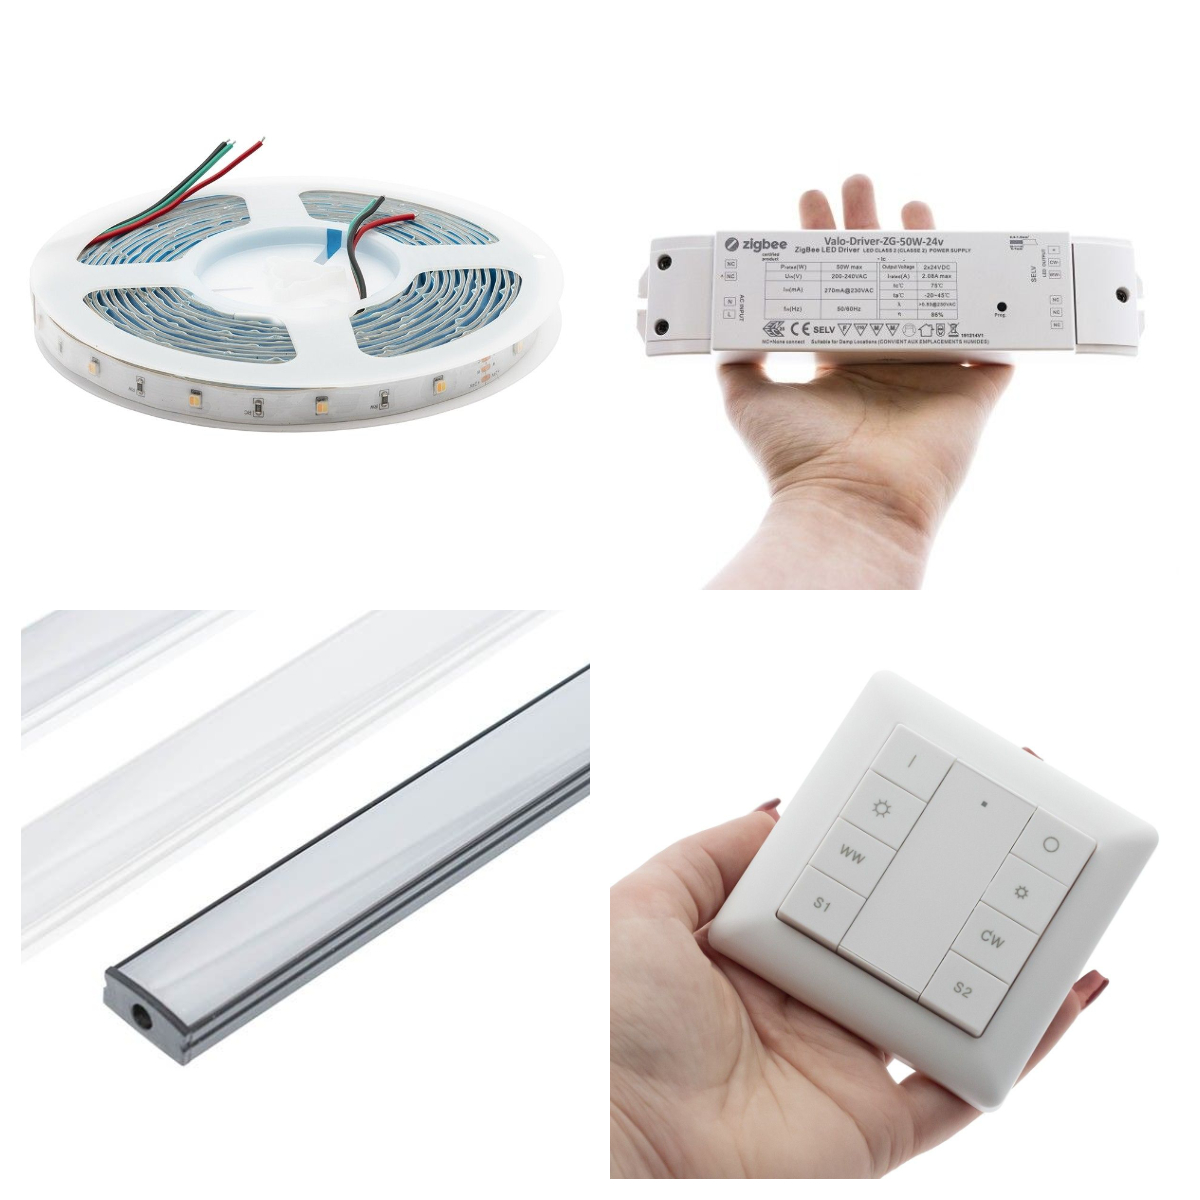 Accessories for non-straight LED strip lighting